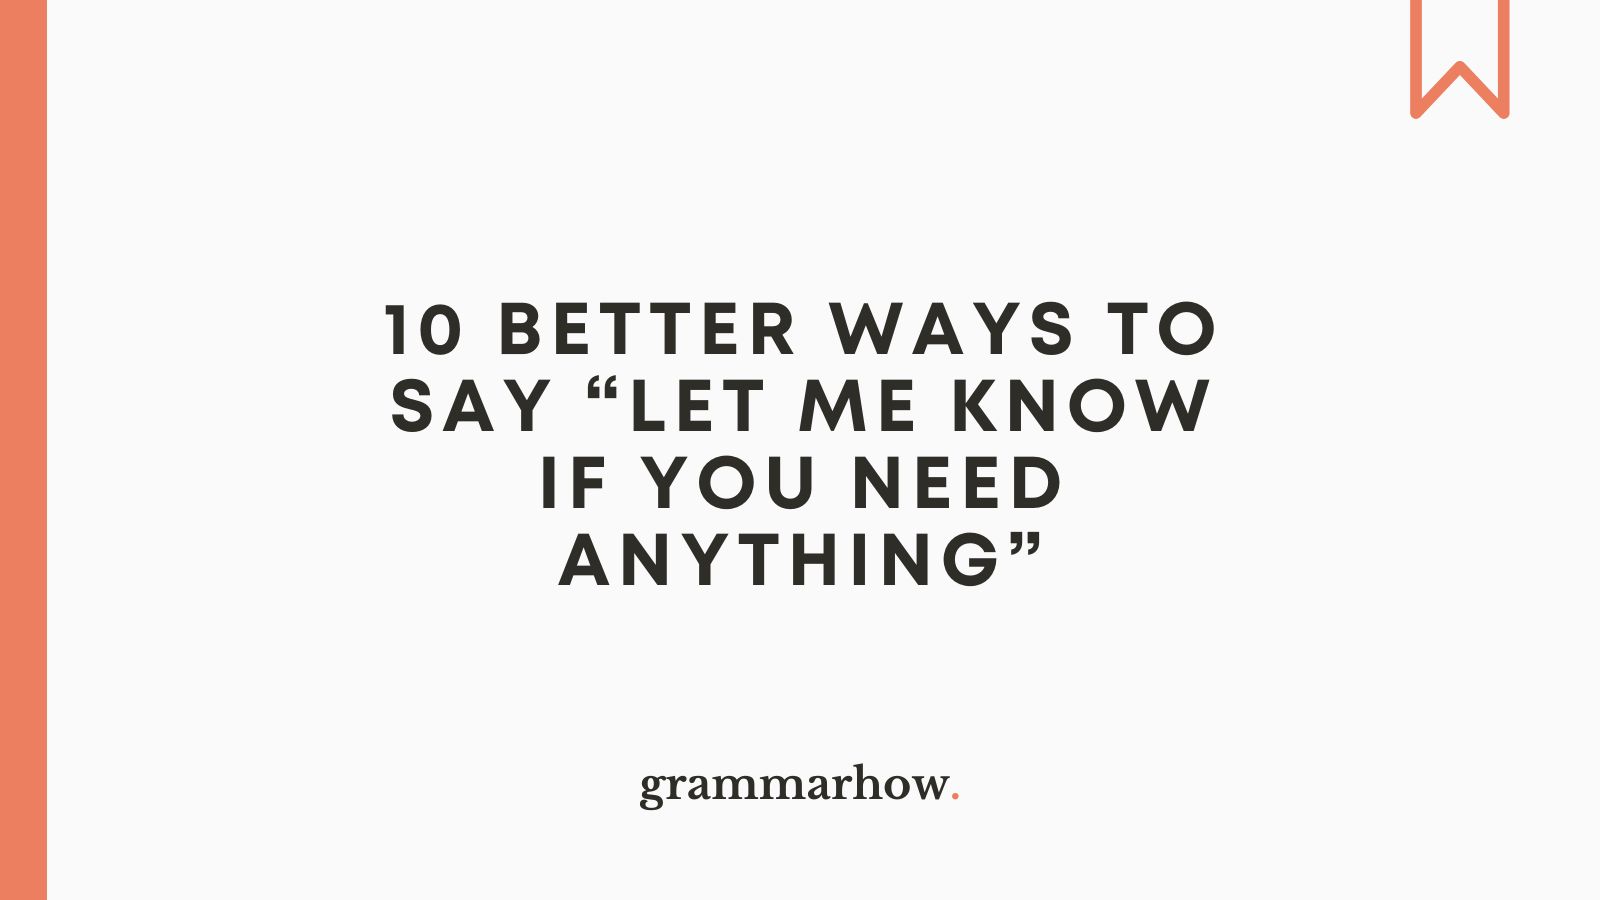 10 Better Ways To Say “let Me Know If You Need Anything”